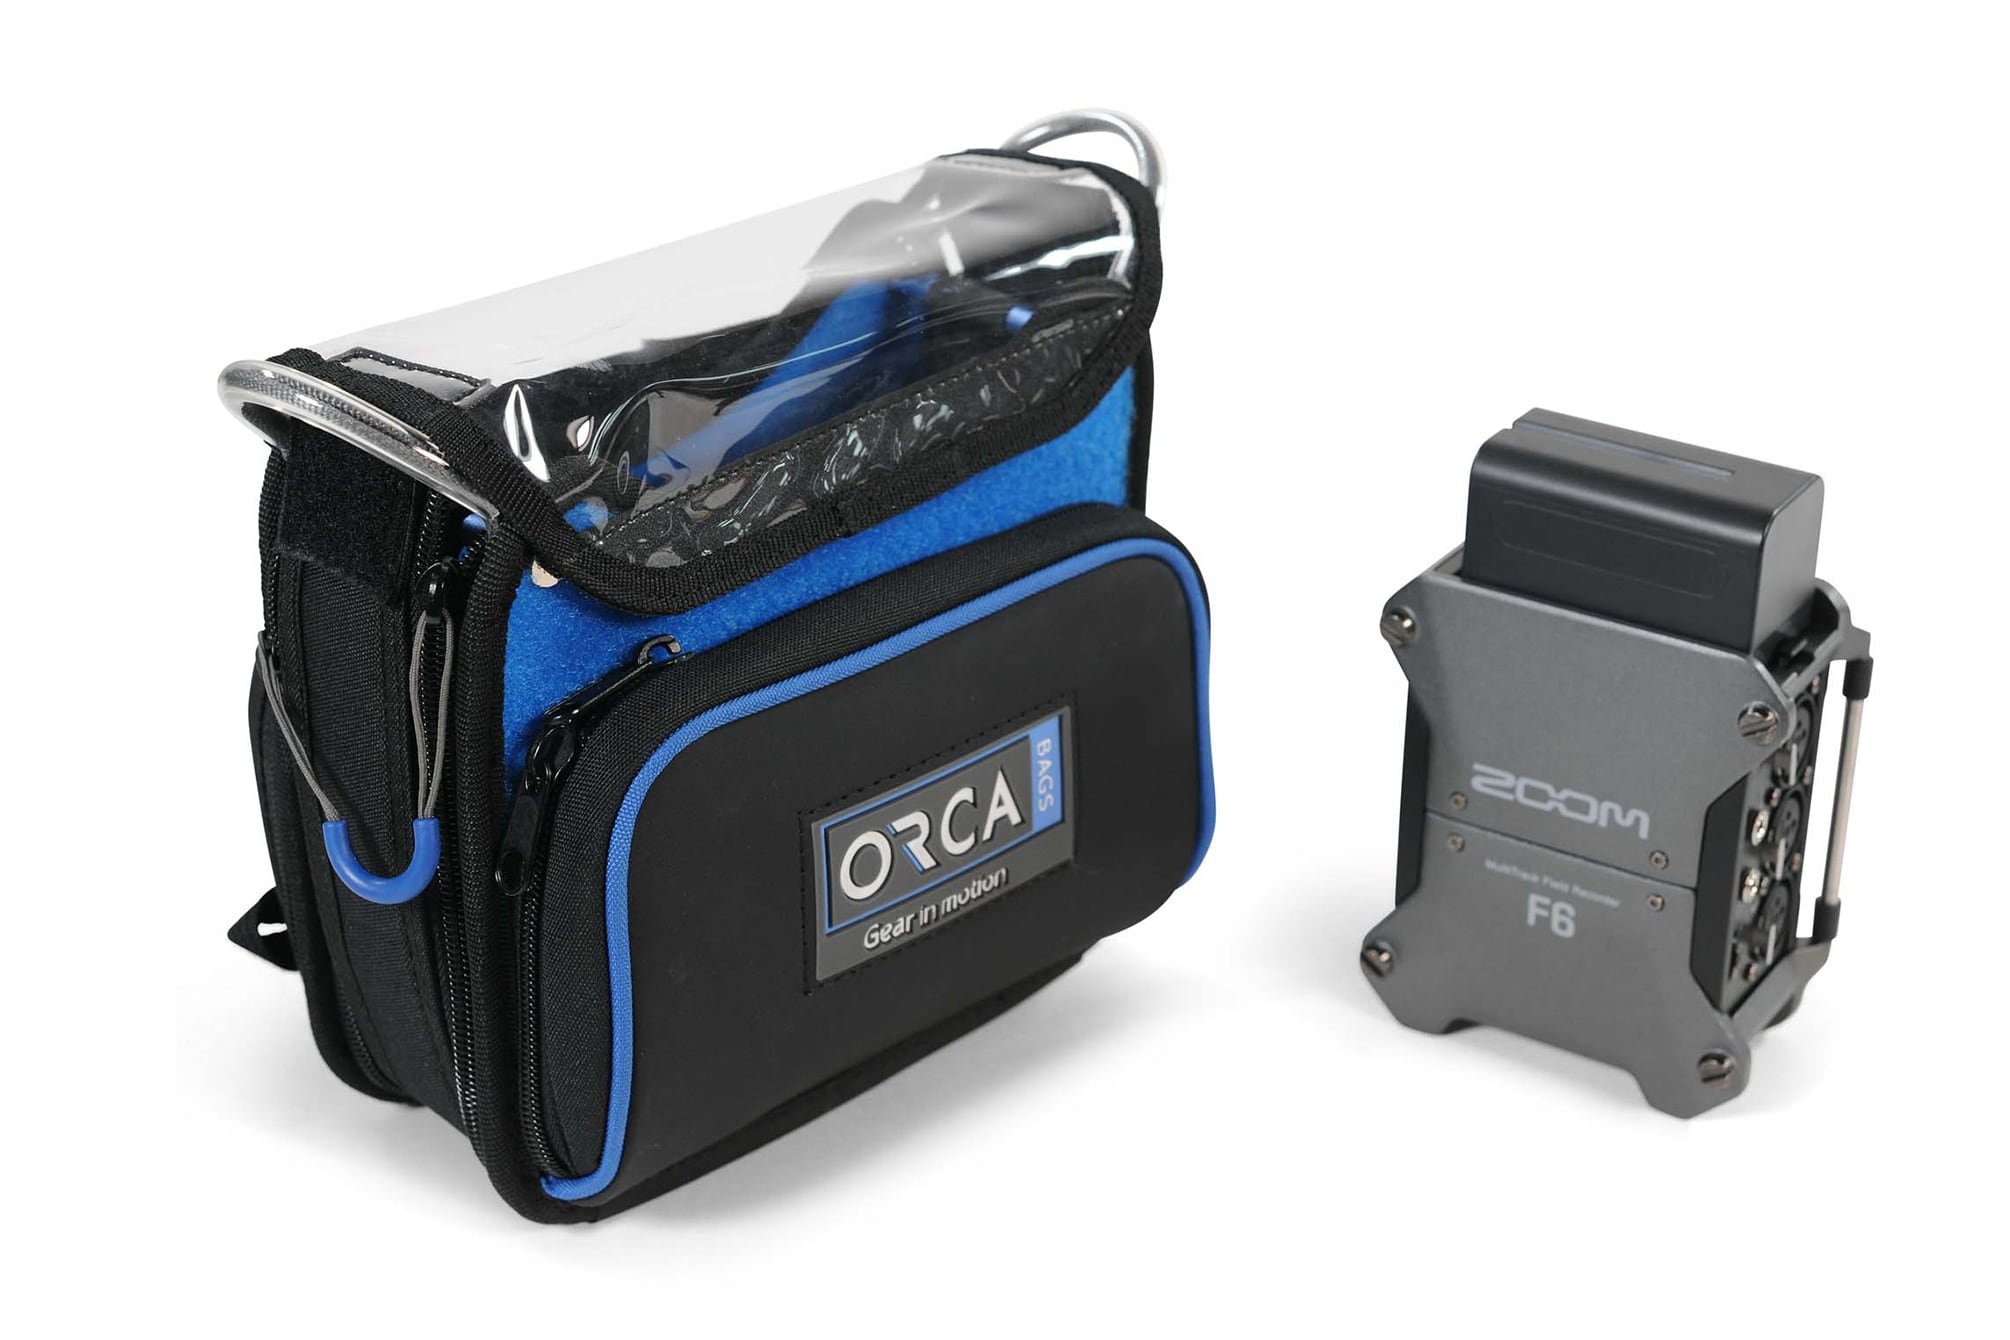 Orca OR-268 Audio Bag for ZOOM F6